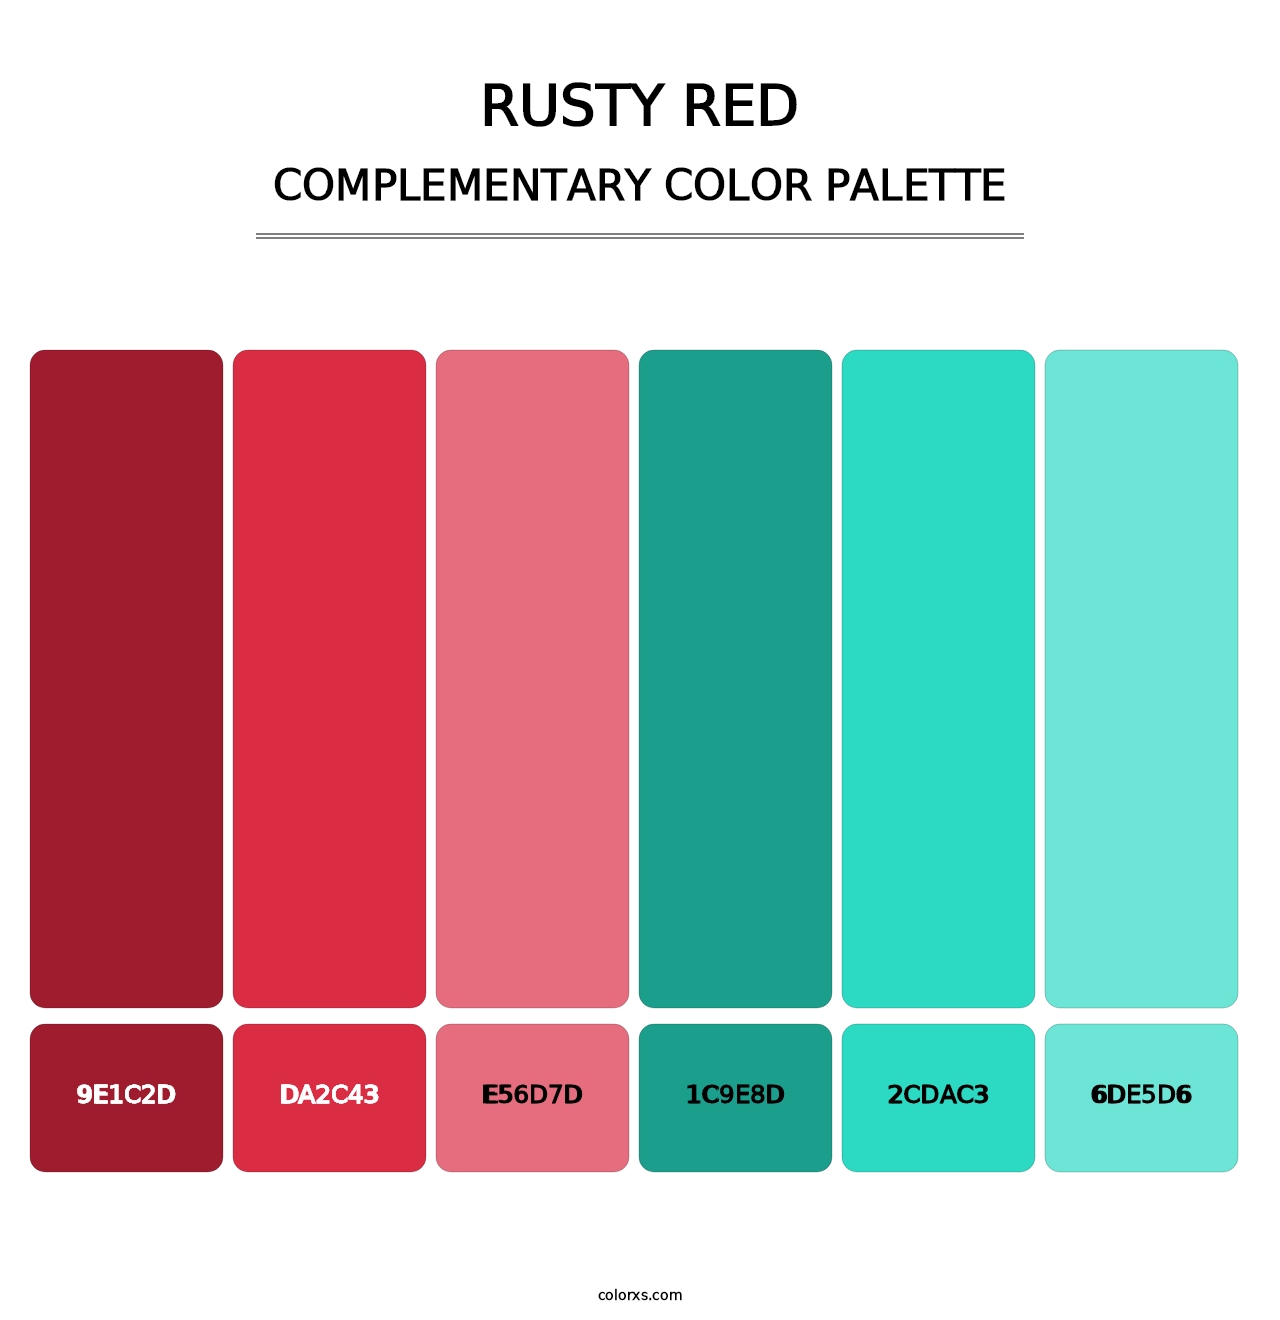 Rusty Red - Complementary Color Palette